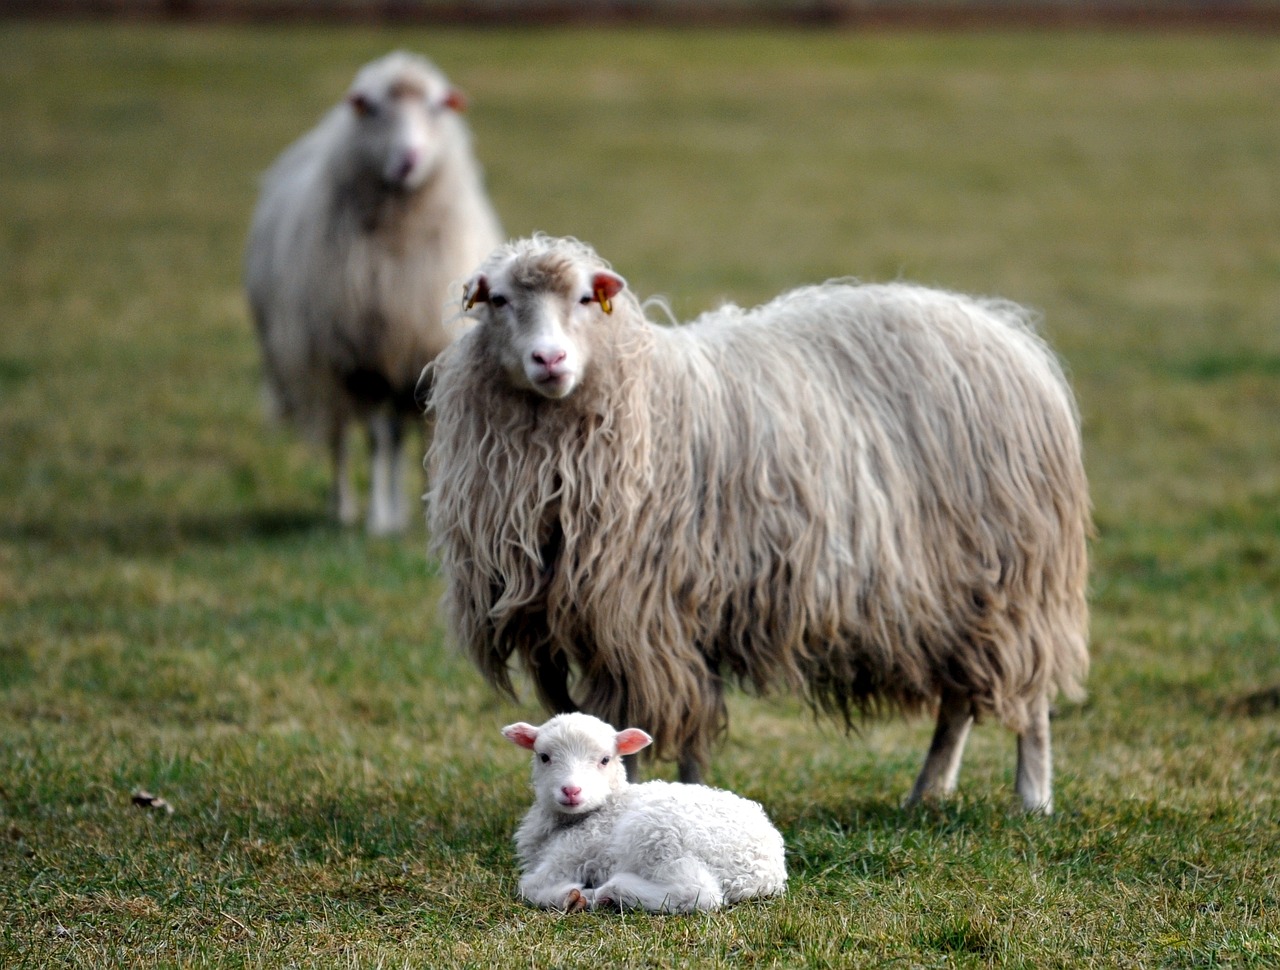 a couple of sheep standing on top of a lush green field, a portrait, by Josef Dande, pixabay, romanticism, motherly, afp, ap photo, lamb wearing a sweater